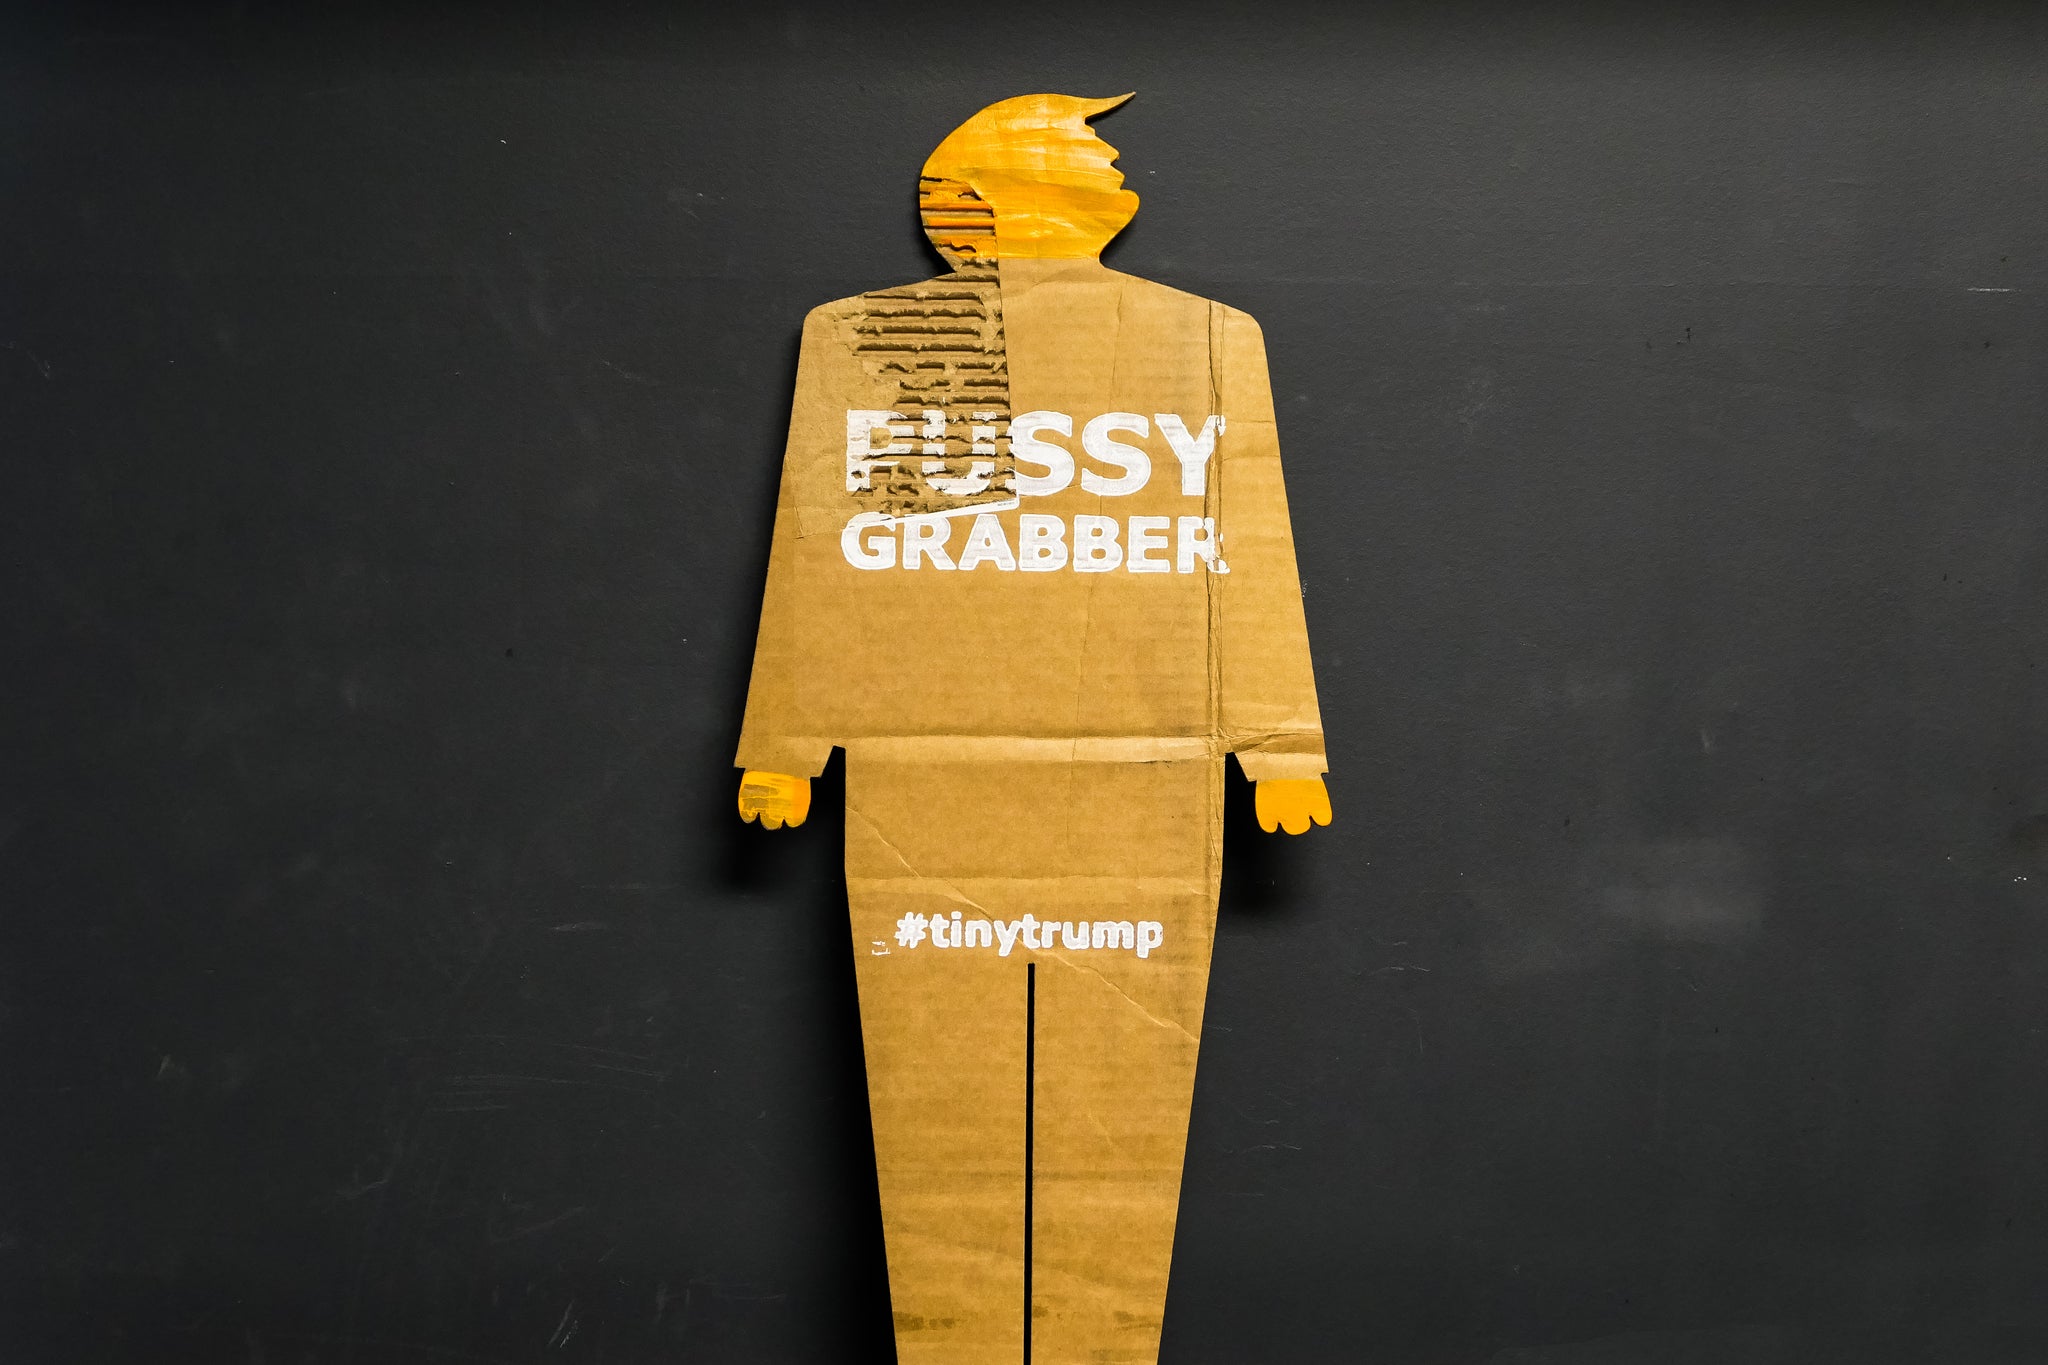 A two foot tall, cardboard tiny trump with the slogan "Pussy Grabber"